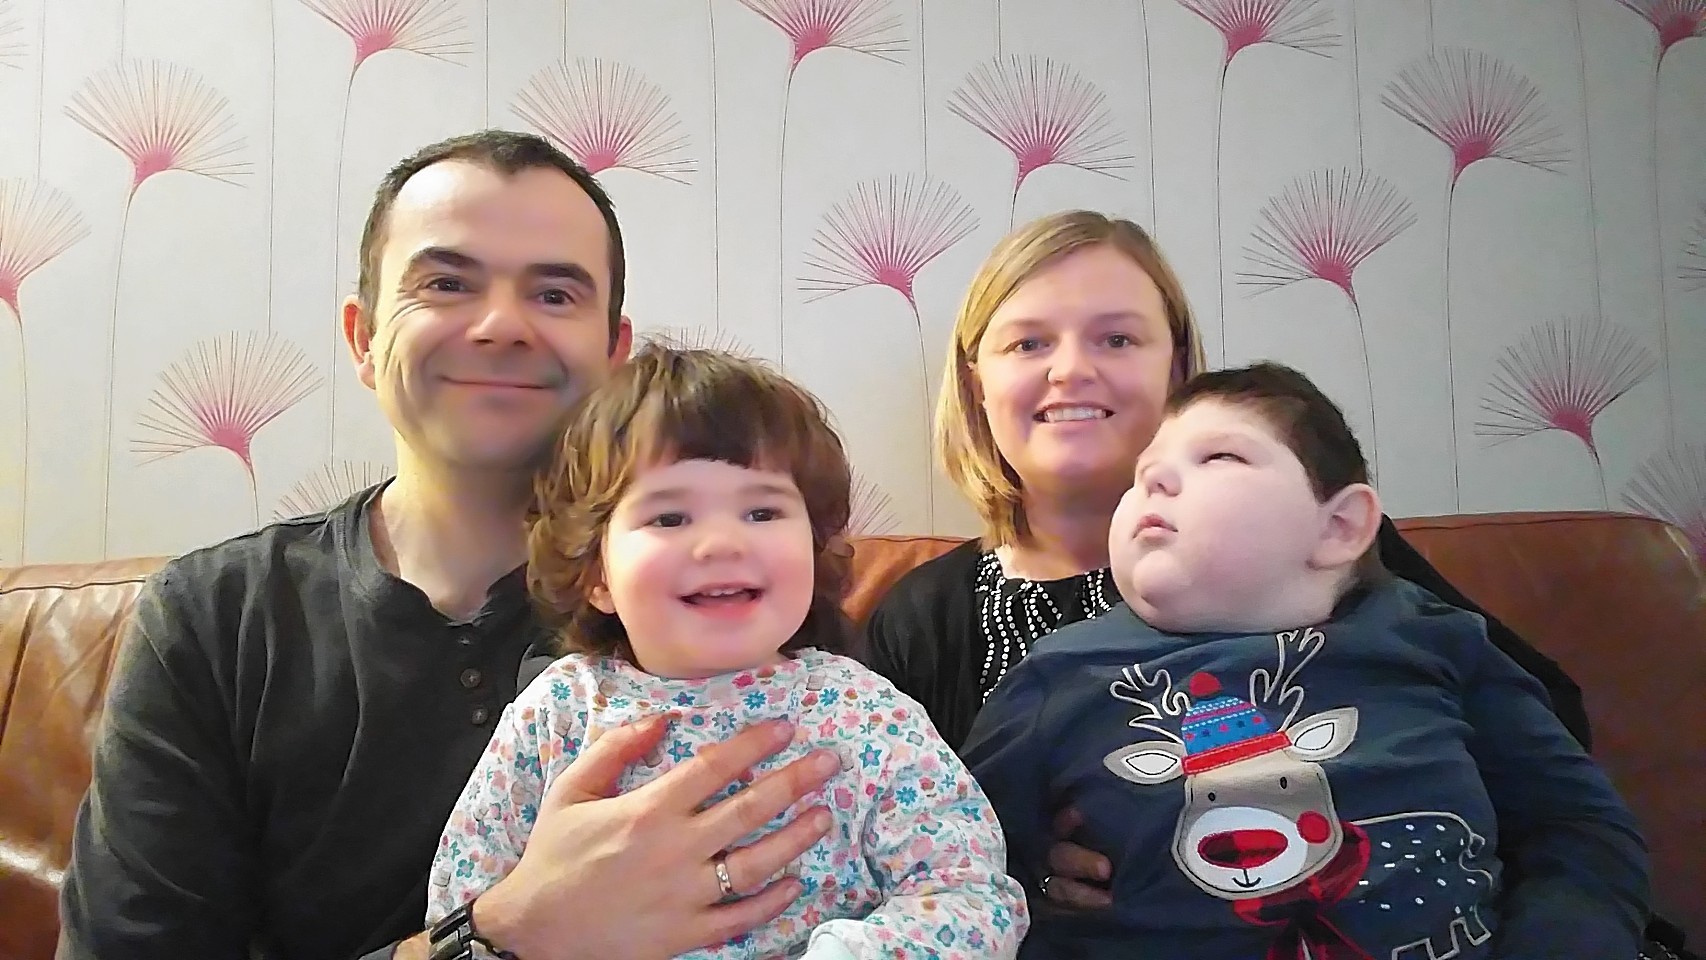 Joanne Jamieson and her husband, Euan, spend every day looking after their son, Rory who has cerebral palsy